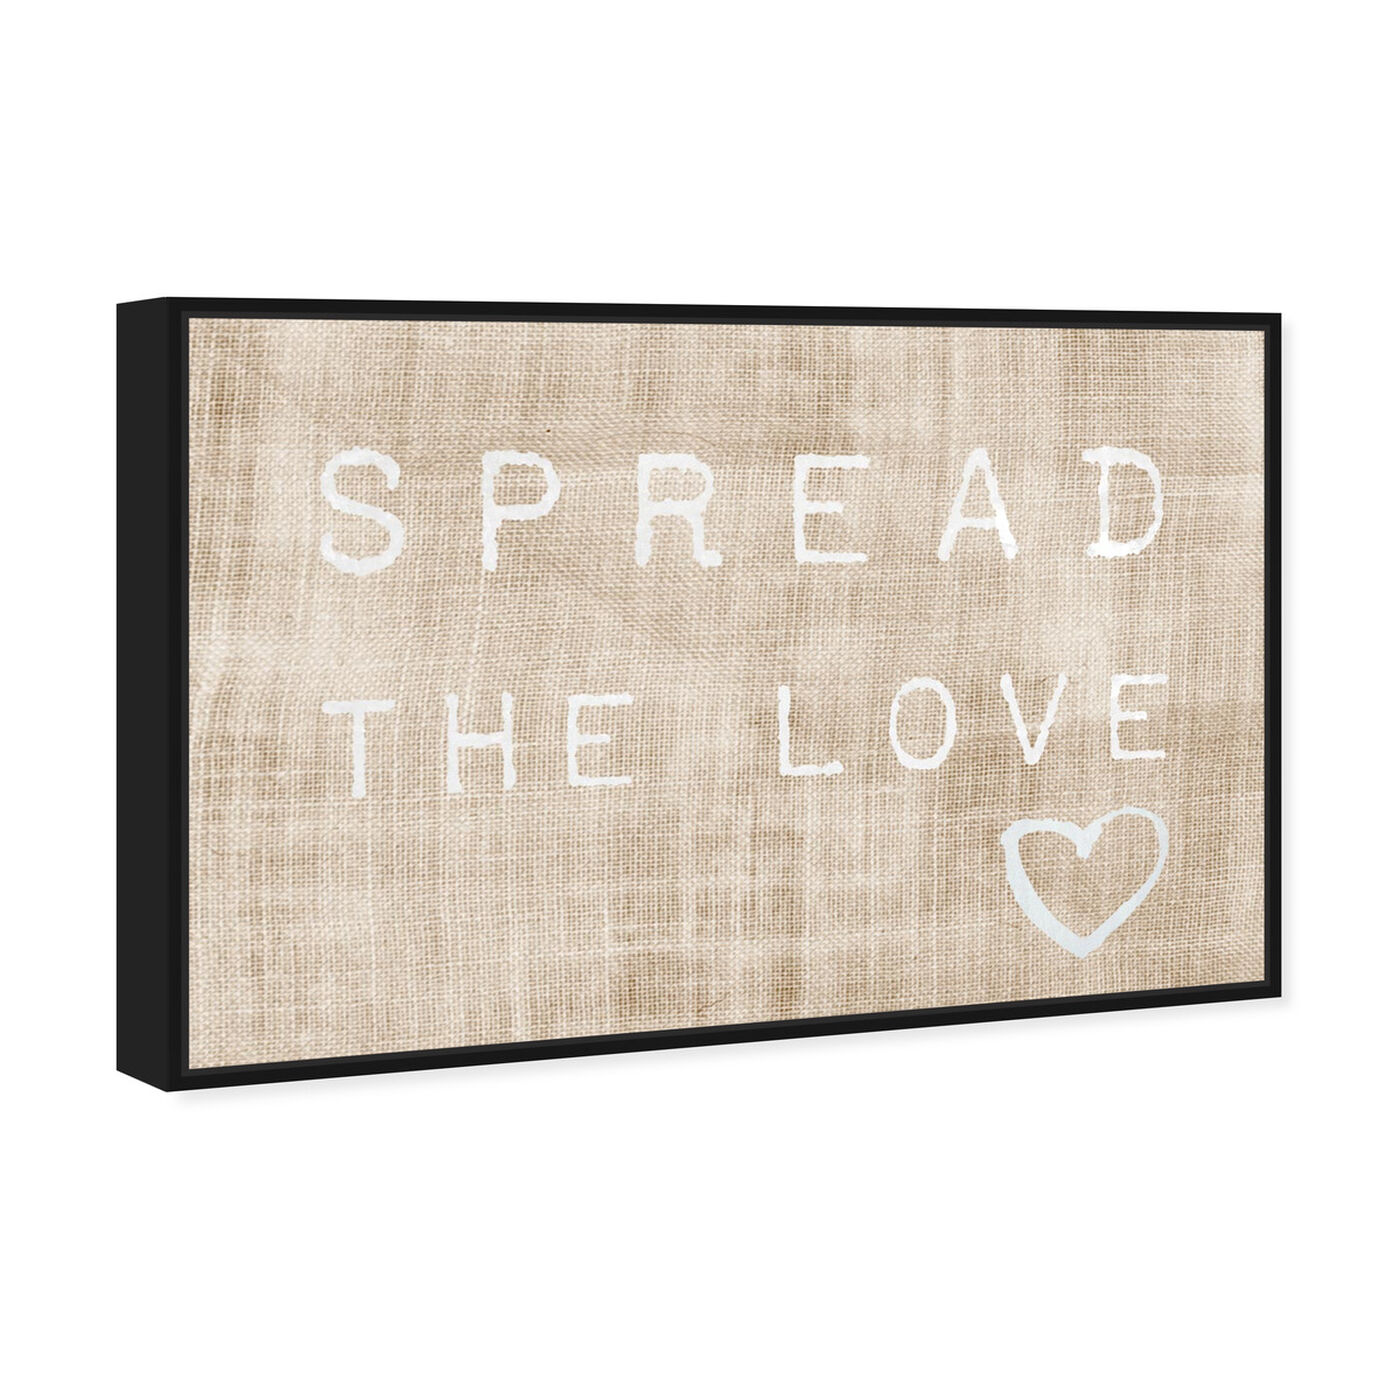 Angled view of Spread the Love featuring typography and quotes and love quotes and sayings art.